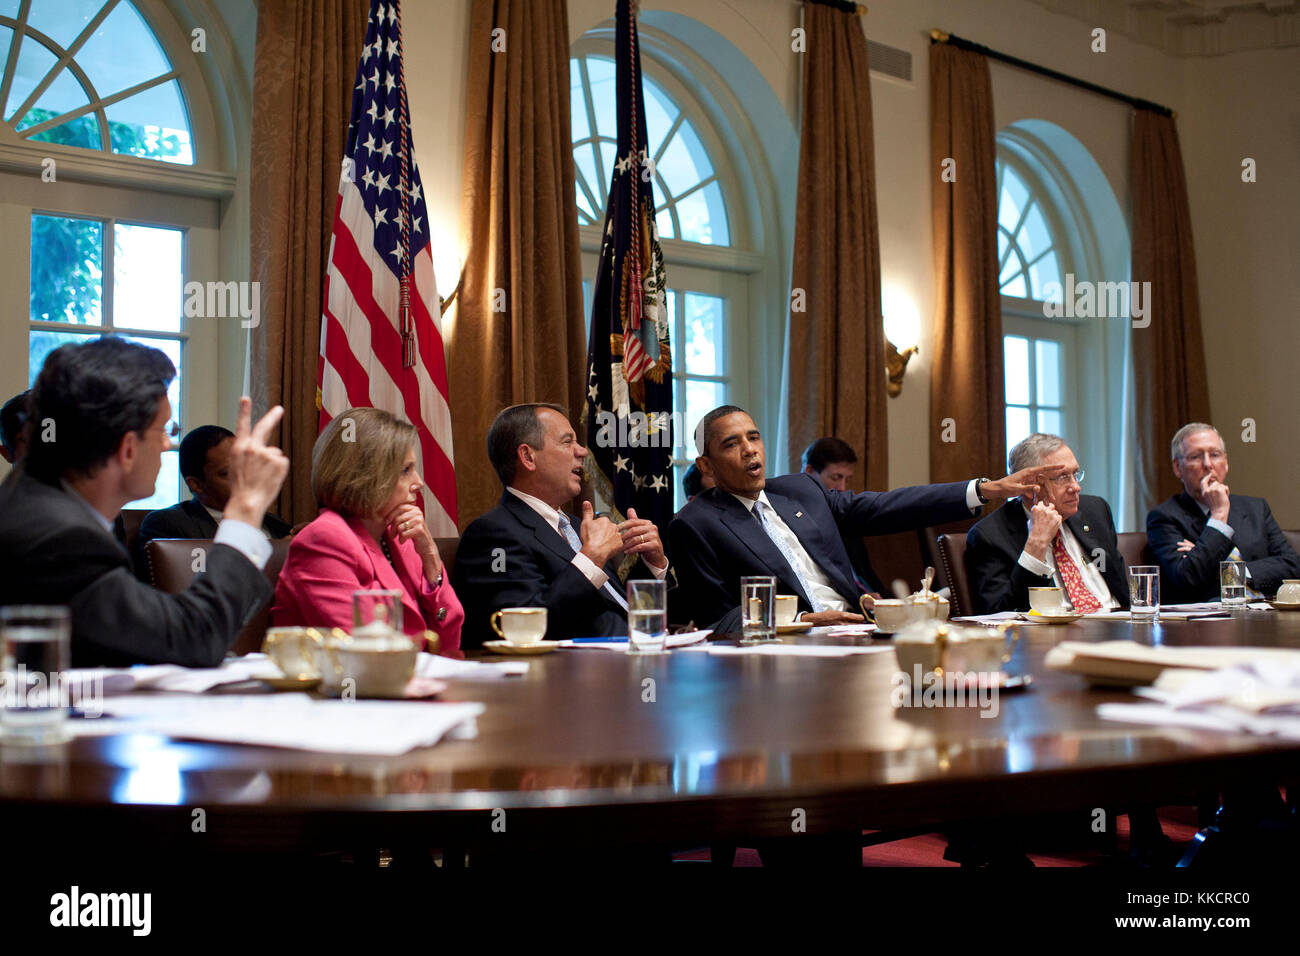 President Barack Obama meets with Congressional Leadership in the Cabinet Room of the White House to discuss ongoing efforts to find a balanced approach to the debt limit and deficit reduction, July 13, 2011. Pictured, from left, are: House Majority Leader Eric Cantor, House Minority Leader Nancy Pelosi, House Speaker John Boehner, Senate Majority Leader Harry Reid, and Senate Minority Leader Mitch McConnell. Stock Photo